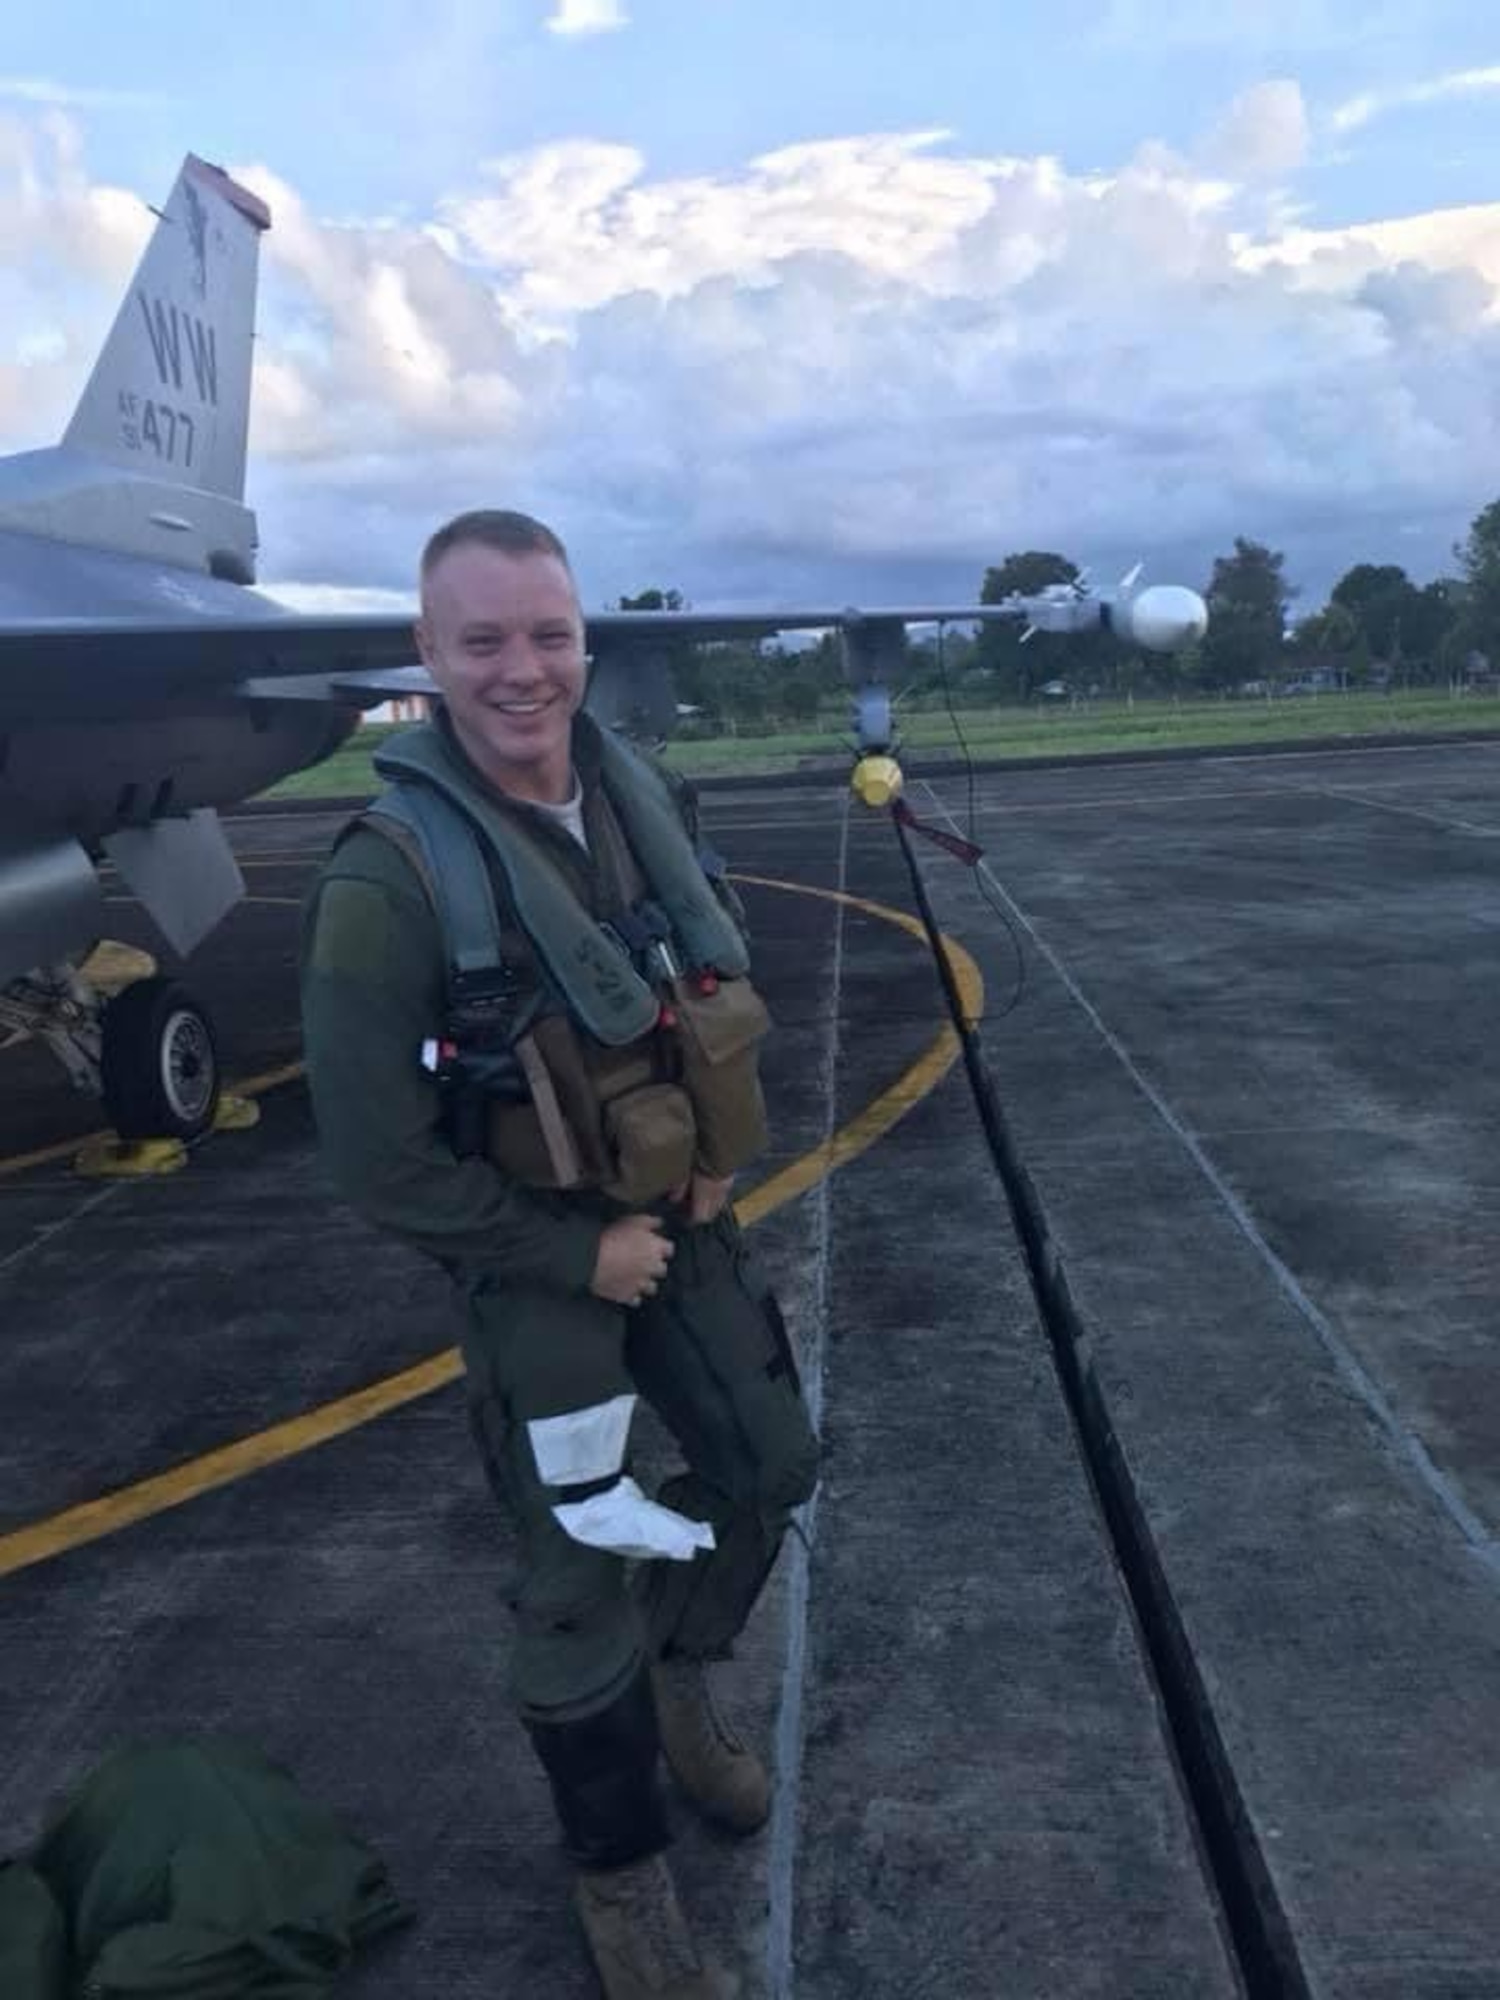 Airman in a flight suit smiles